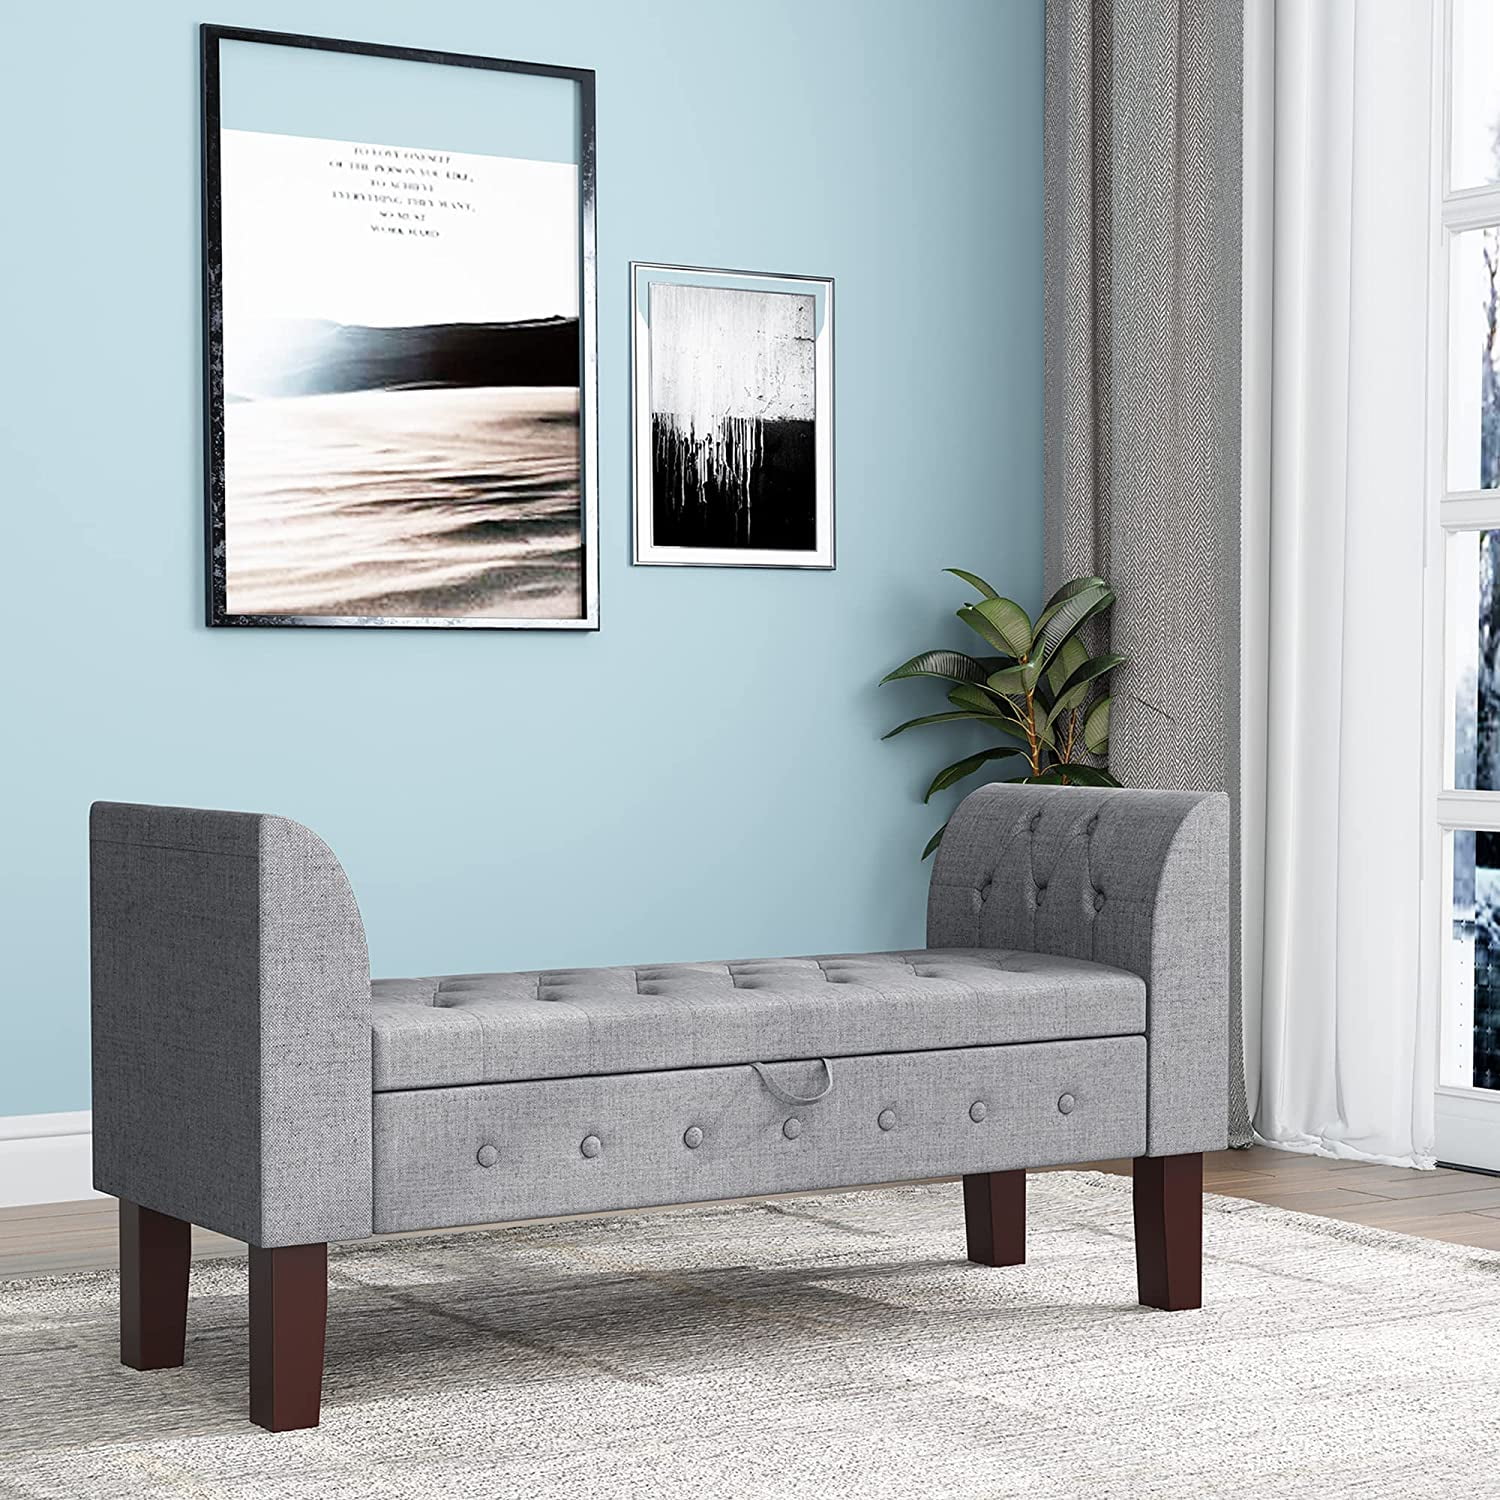 Bedroom Upholstered Ottoman Storage Khaki Bench with Entryway Arms Andeworld Living Bench for Room